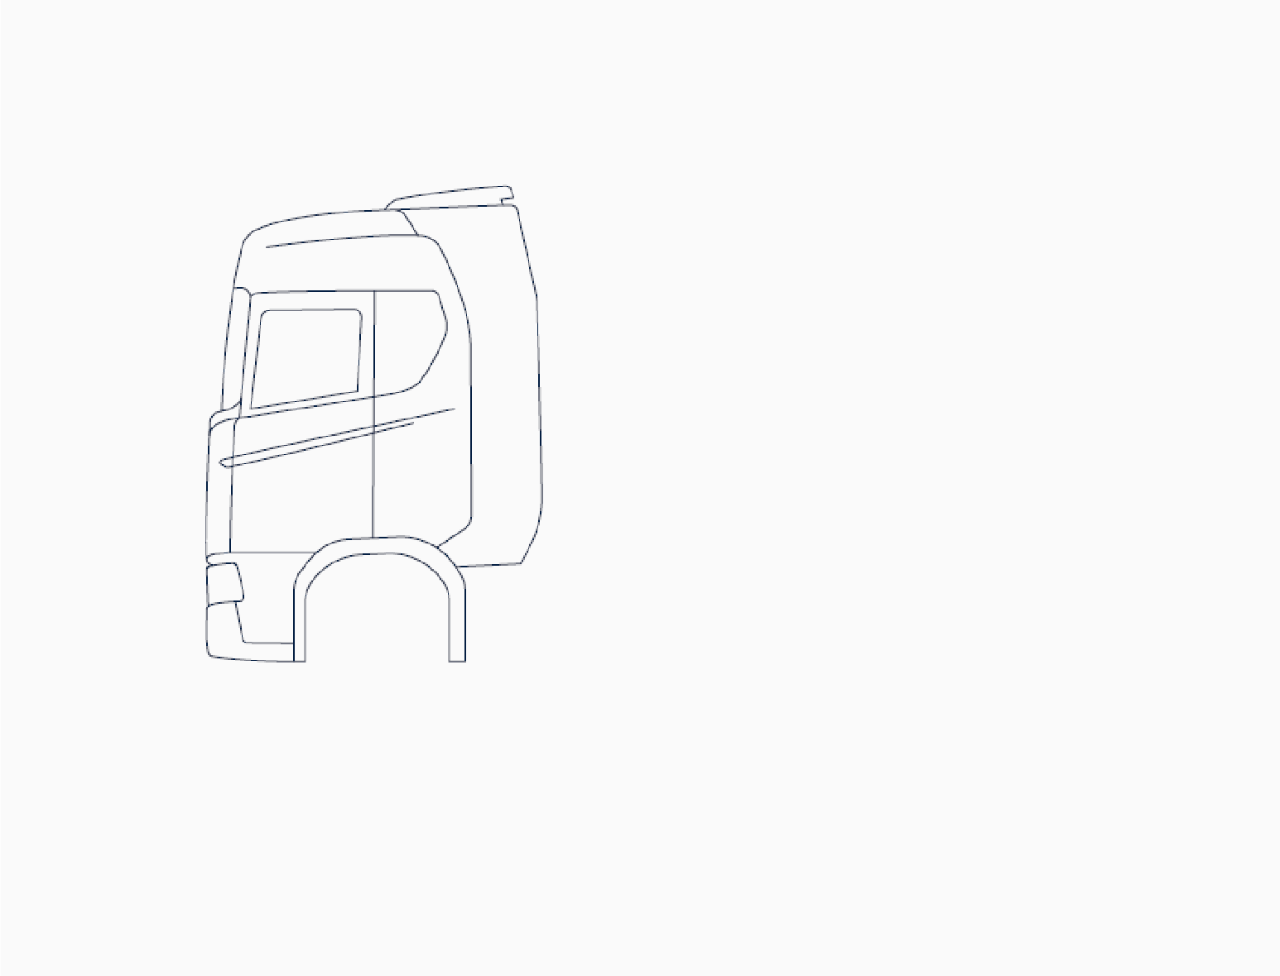 Simplified illustration of truck